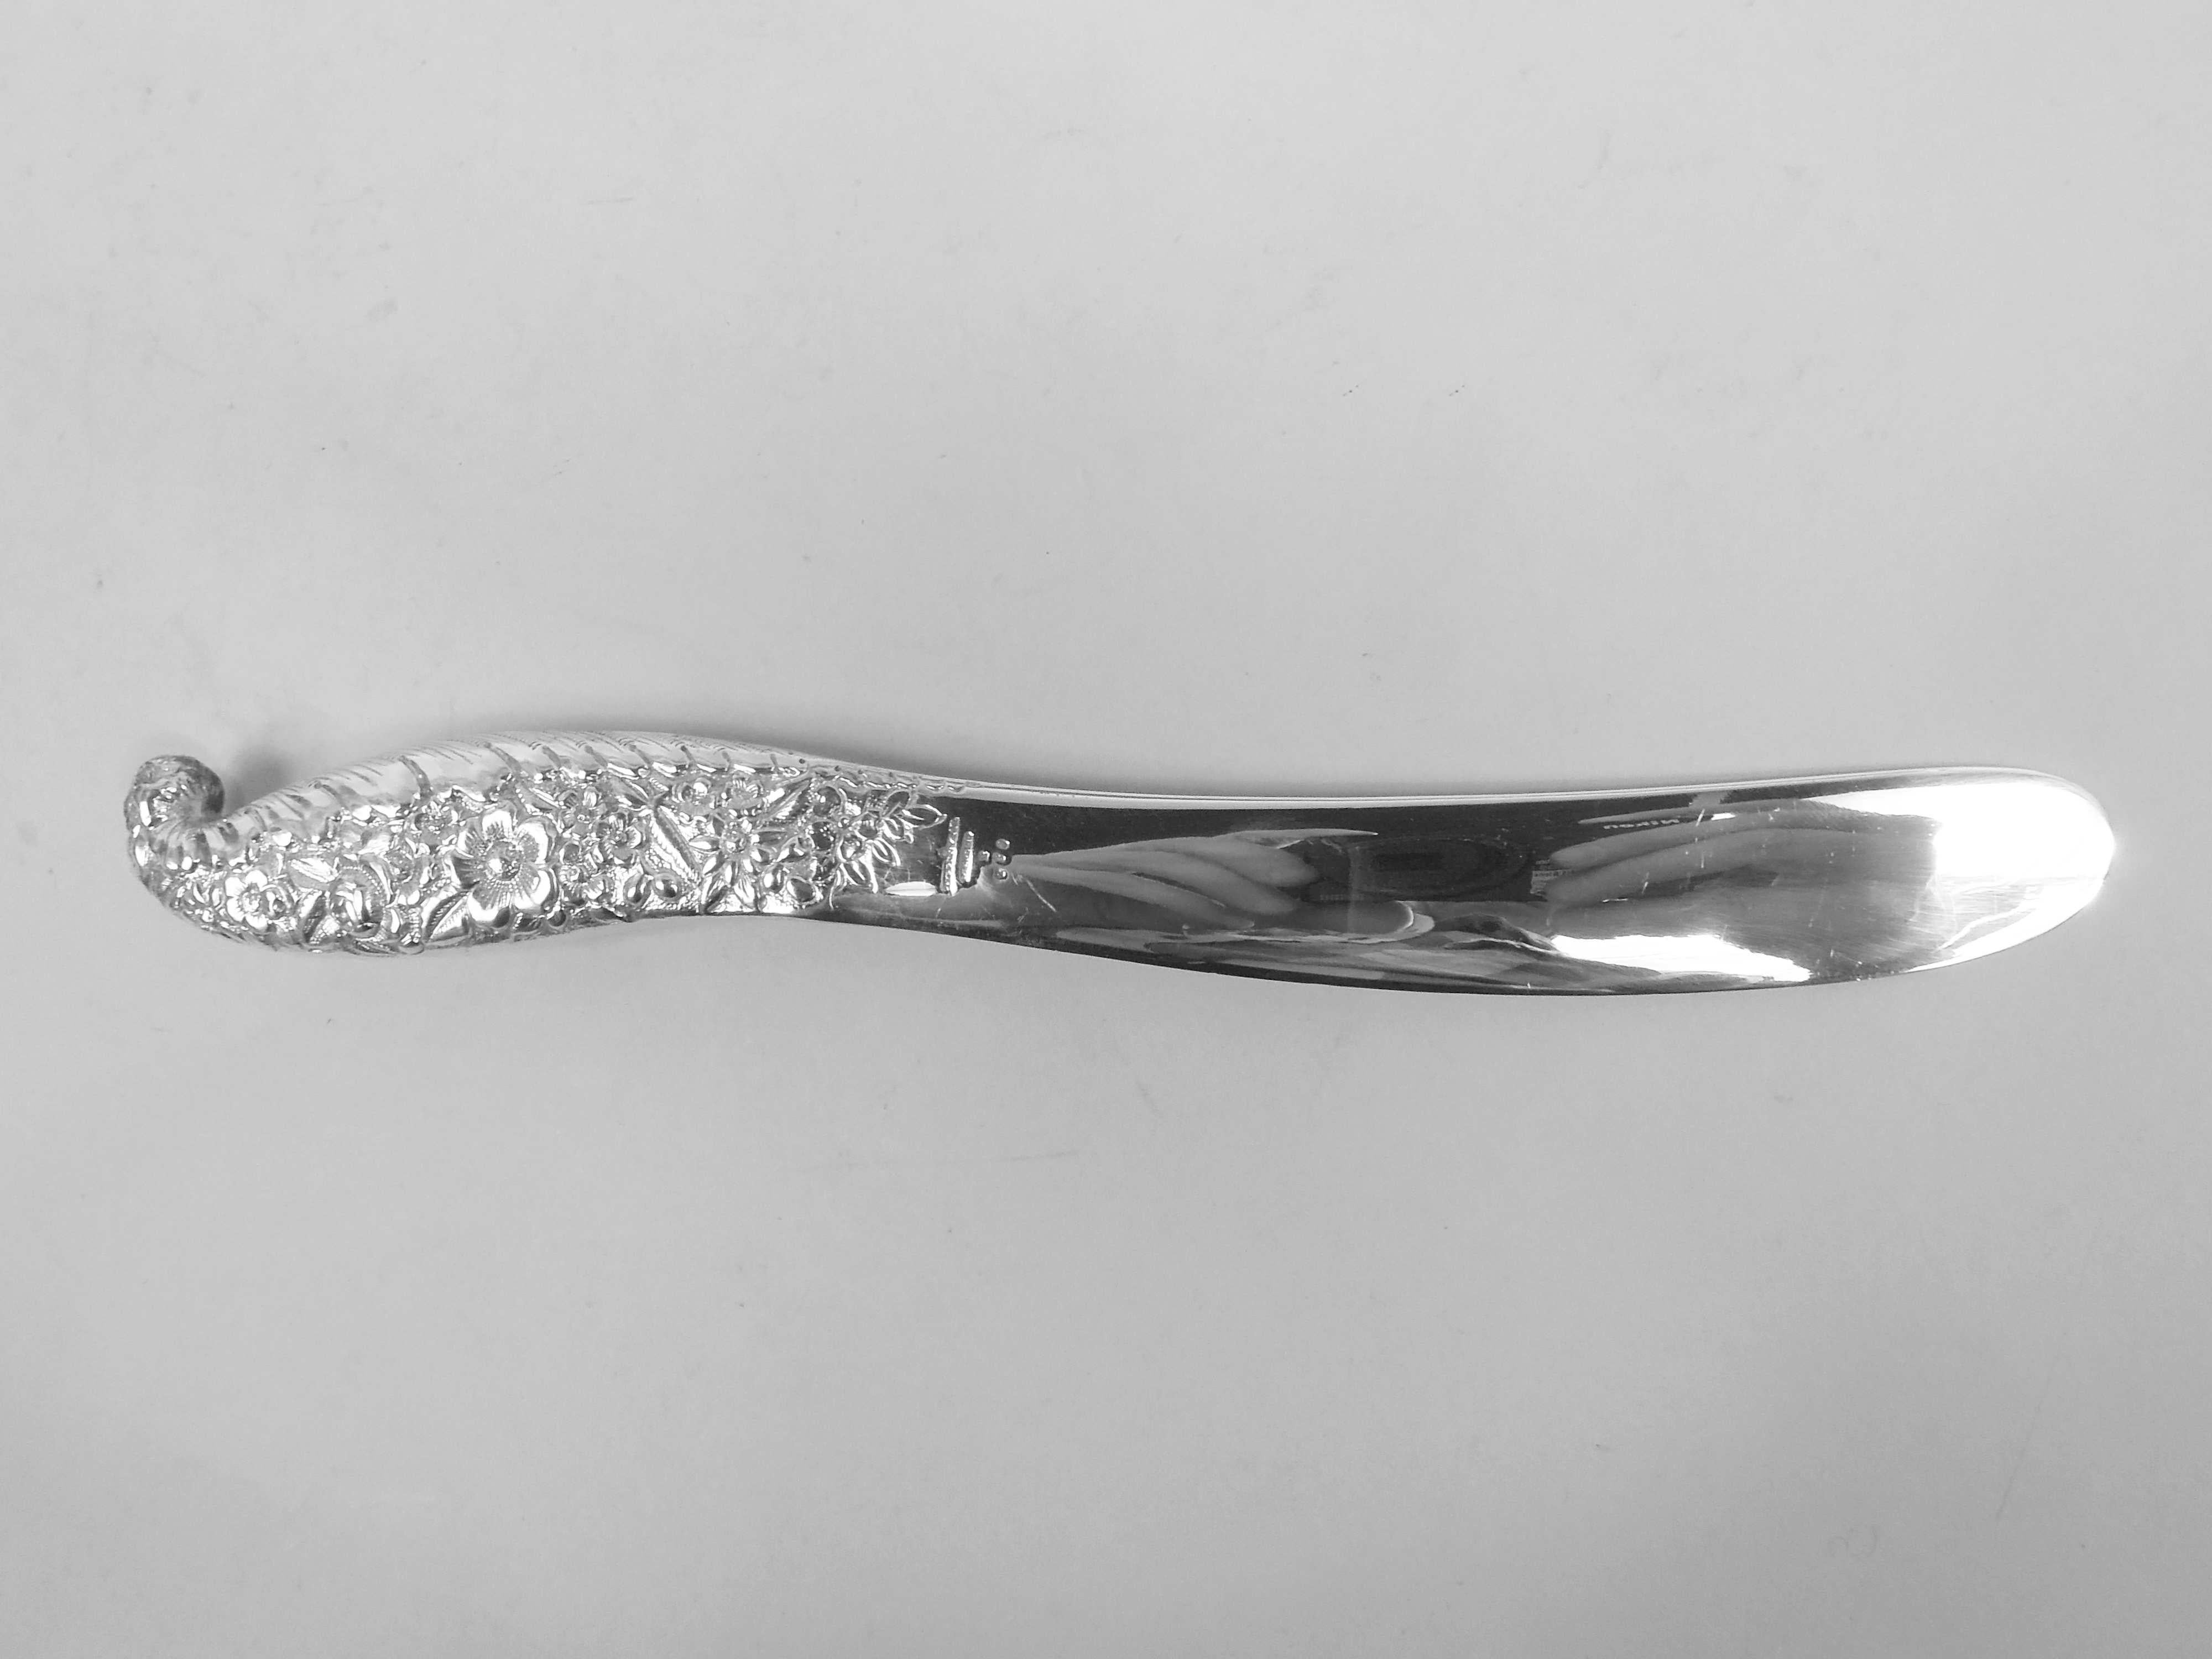 Victorian Classical sterling silver paper knife. Made by Tiffany & Co. in New York, ca 1885. Serpentine and integral with hollow handle tapering into flat blade. Handle has allover floral repousse with feathered leaf border at bottom. Blade recto